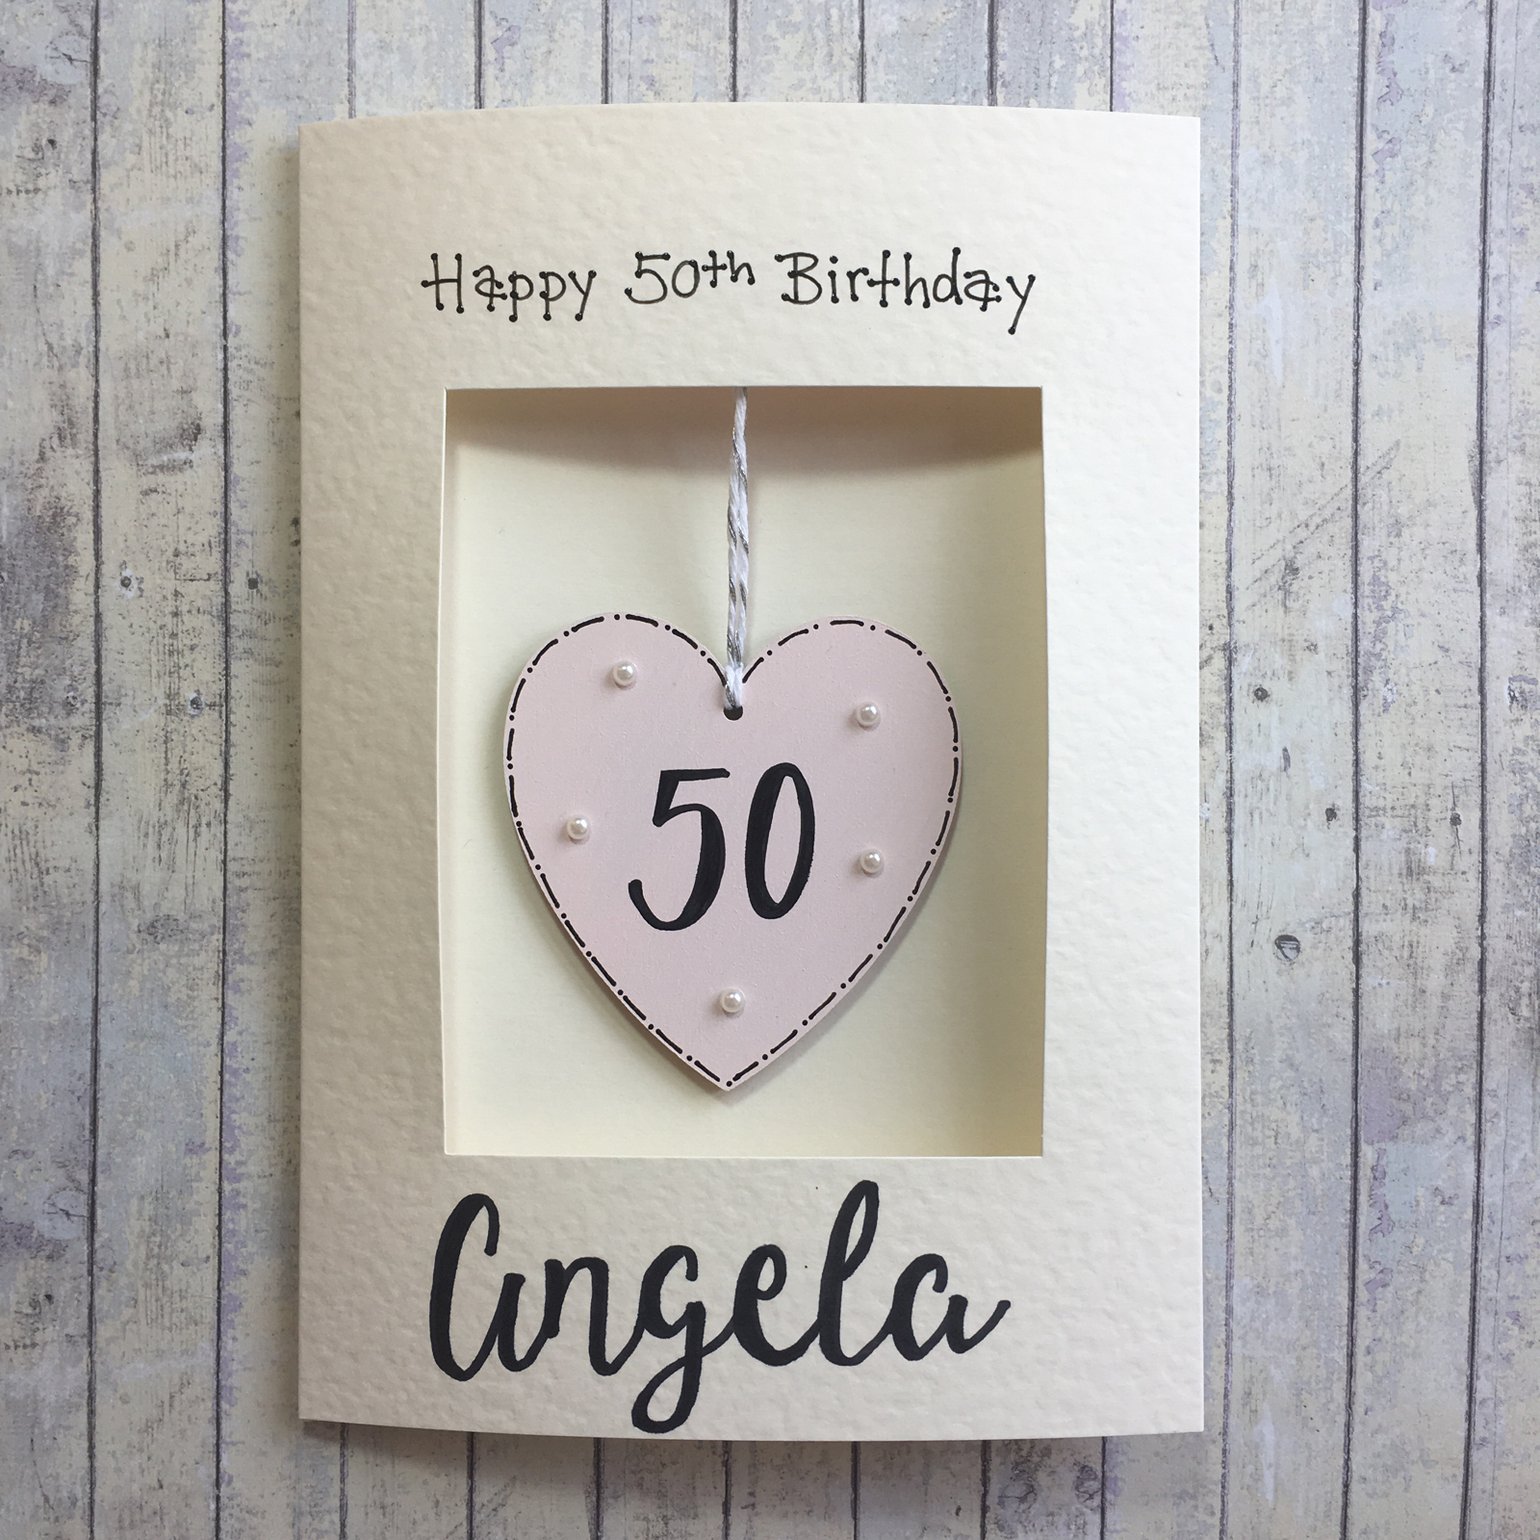 Image of Birthday Card with wooden heart